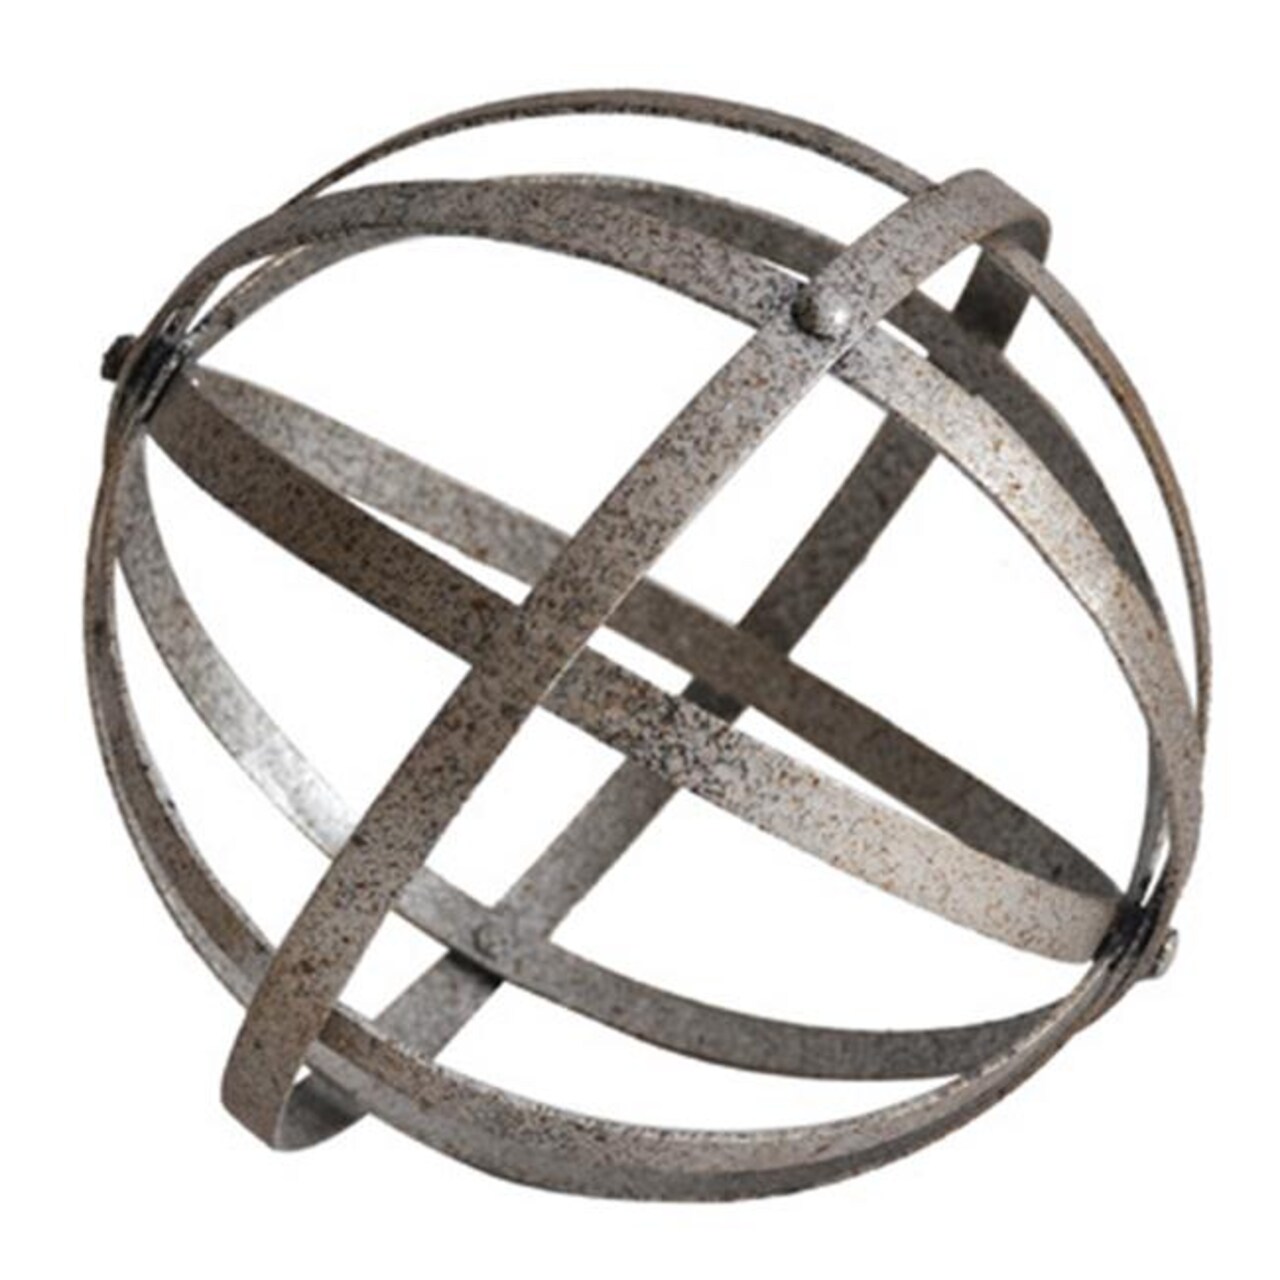 Cheungs FP-4459S Metal Folding Orb, Small - 7.5 x 7.5 x 7.5 in.